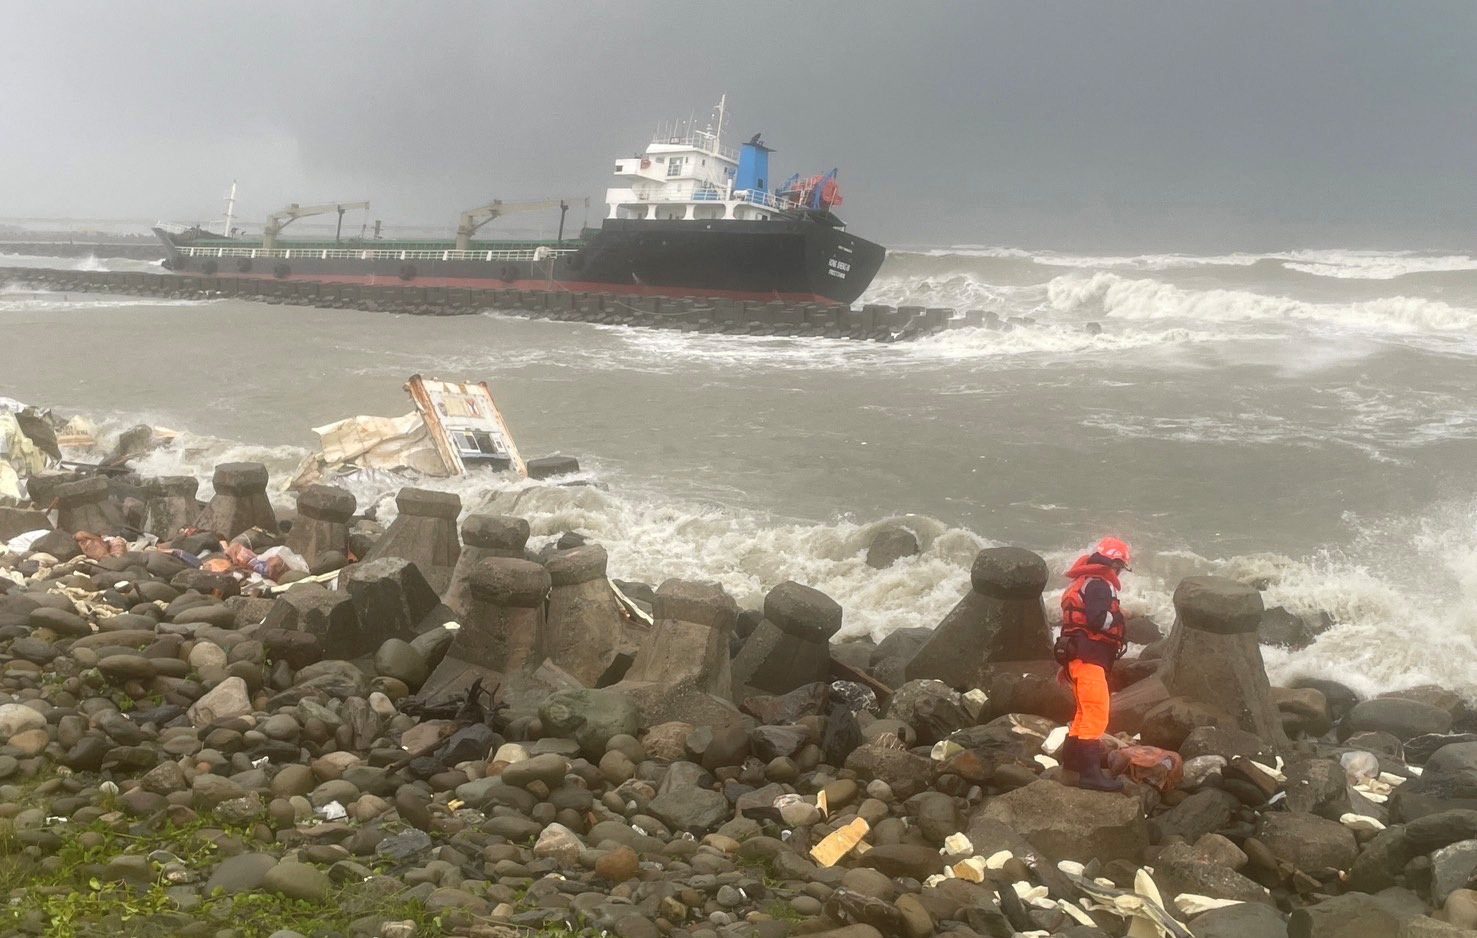 A view shows cargo ship Hong Sheng 88, which according to Taiwan's Ocean Affairs Council was stranded due to Typhoon Gaemi, off the coast of Kaohsiung, Taiwan in this handout image released on July 26, 2024. Taiwan Ocean Affairs Council/Handout via REUTERS